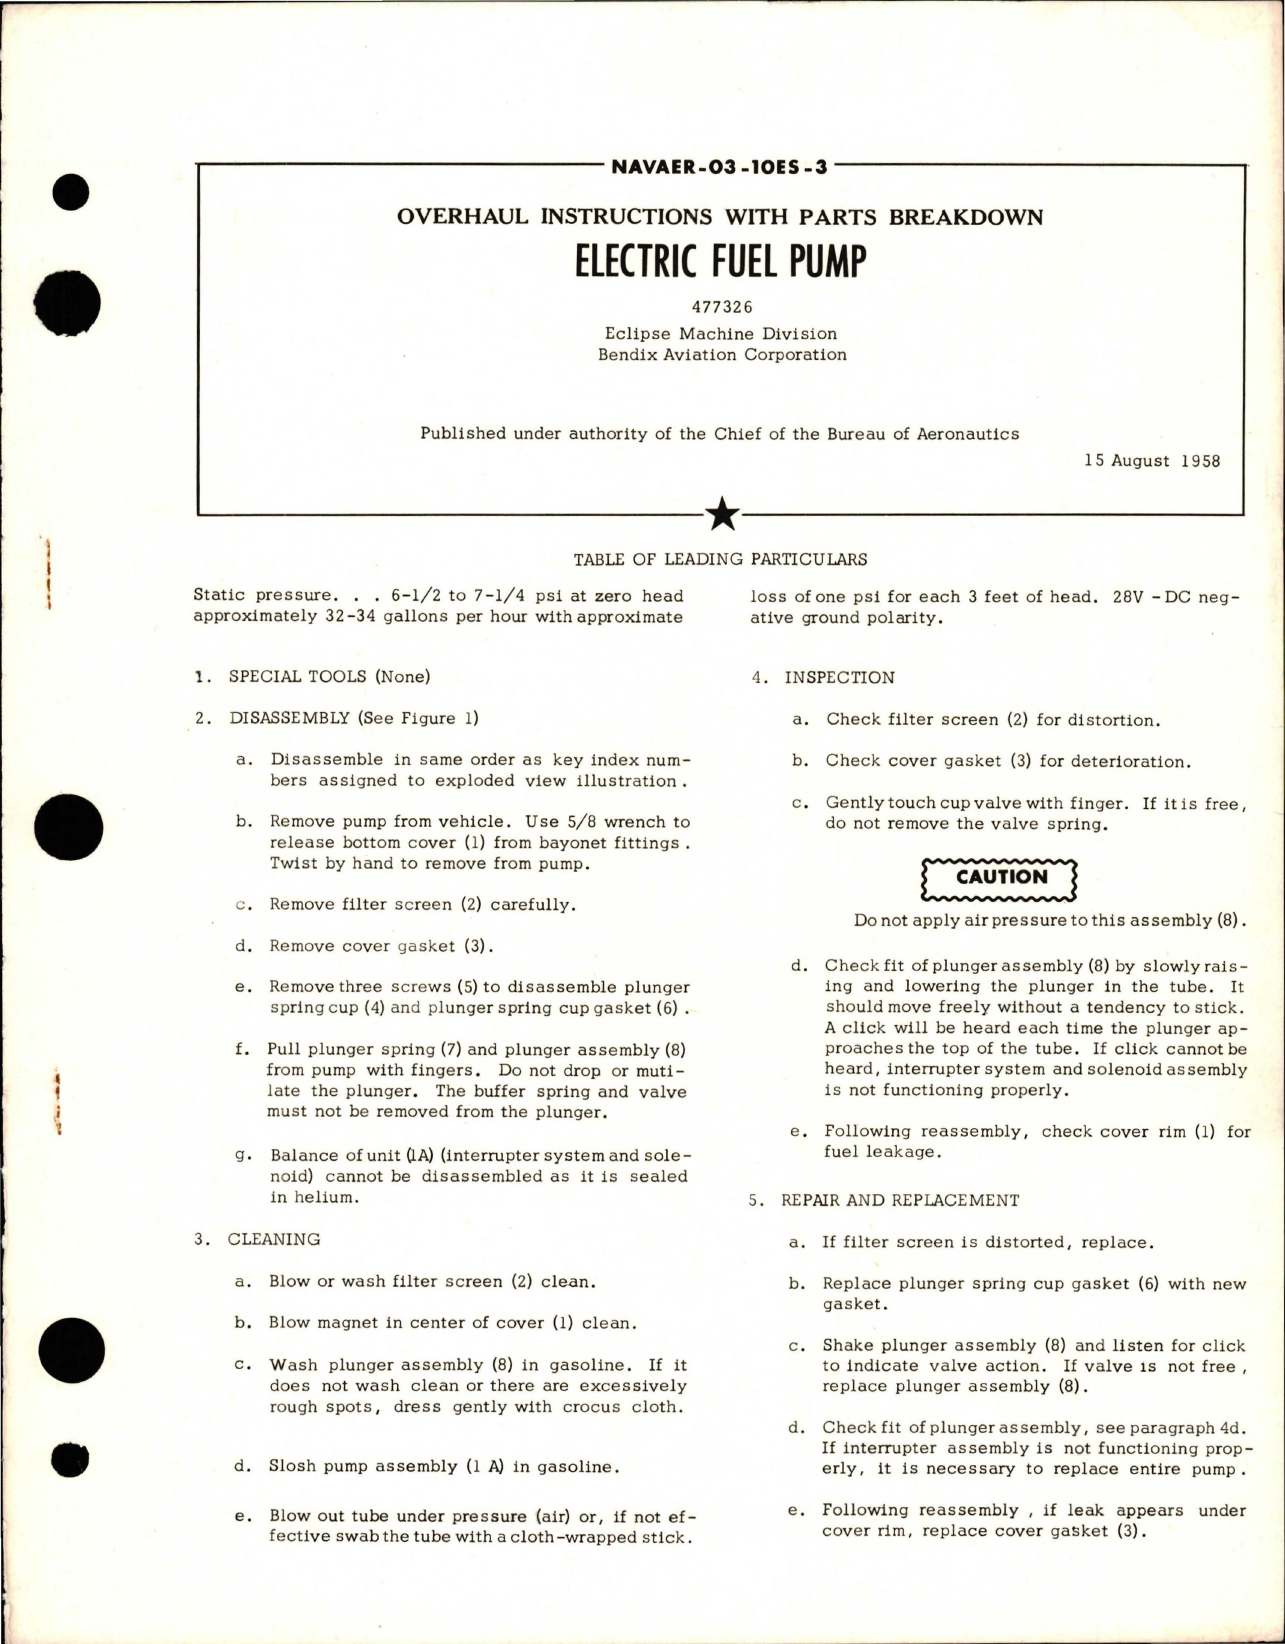 Sample page 1 from AirCorps Library document: Overhaul Instructions with Parts Breakdown for Electric Fuel Pump - 477326